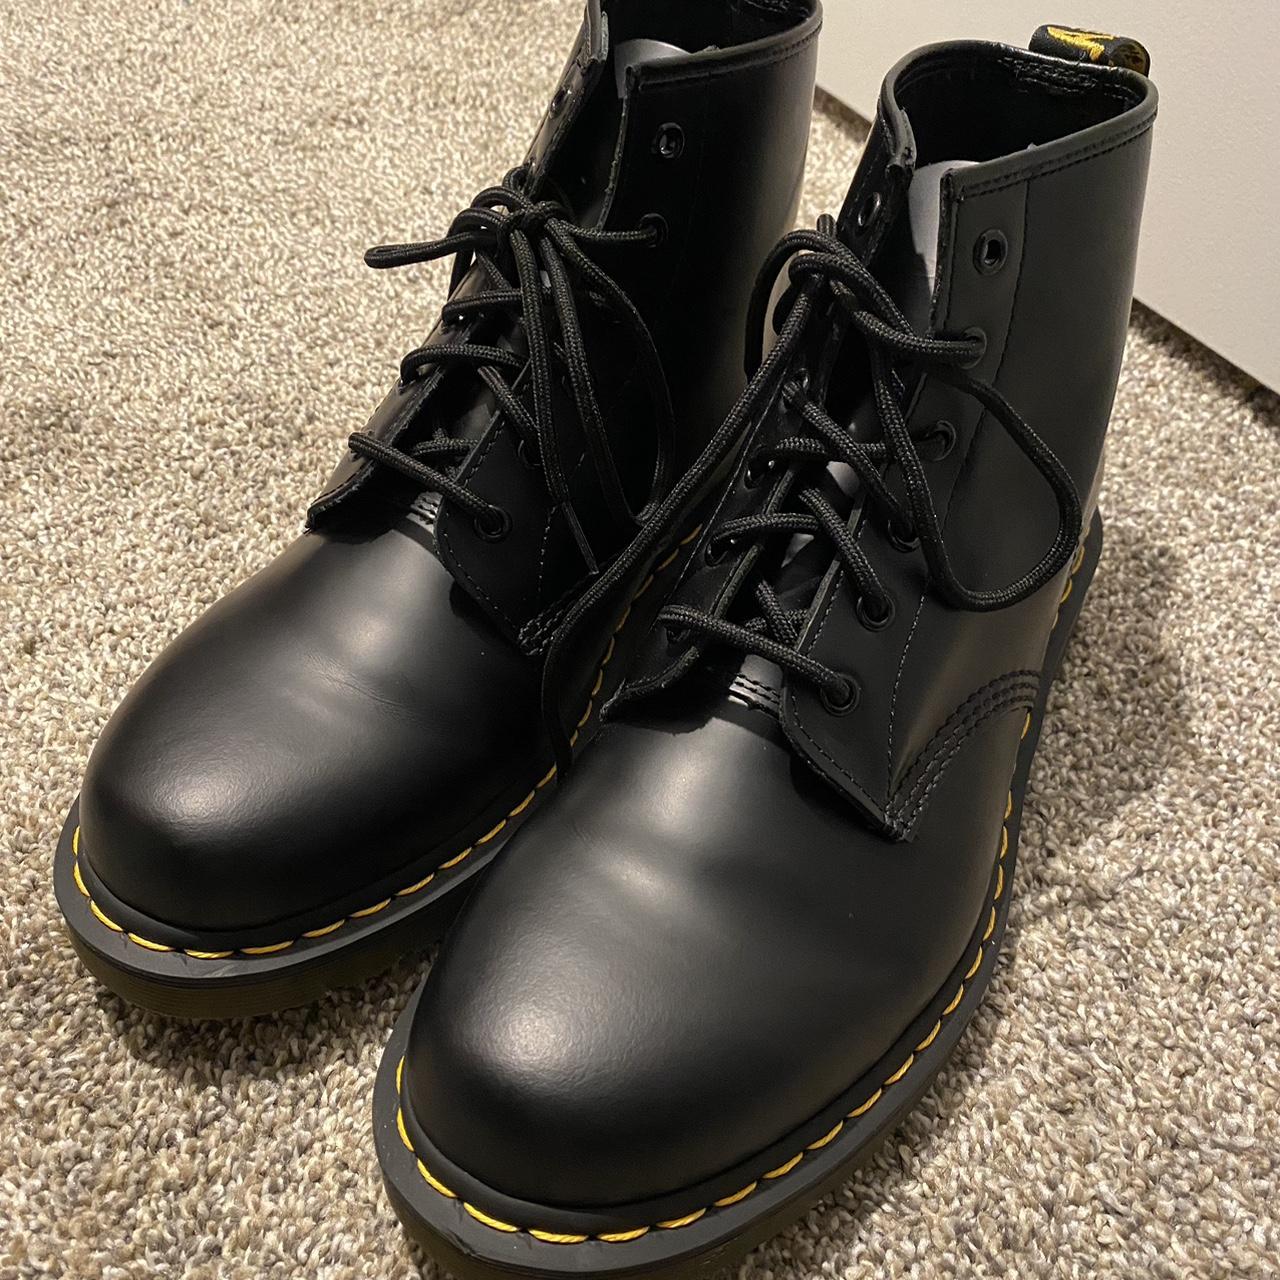 Dr. Martens Men's Black and Yellow Boots (2)